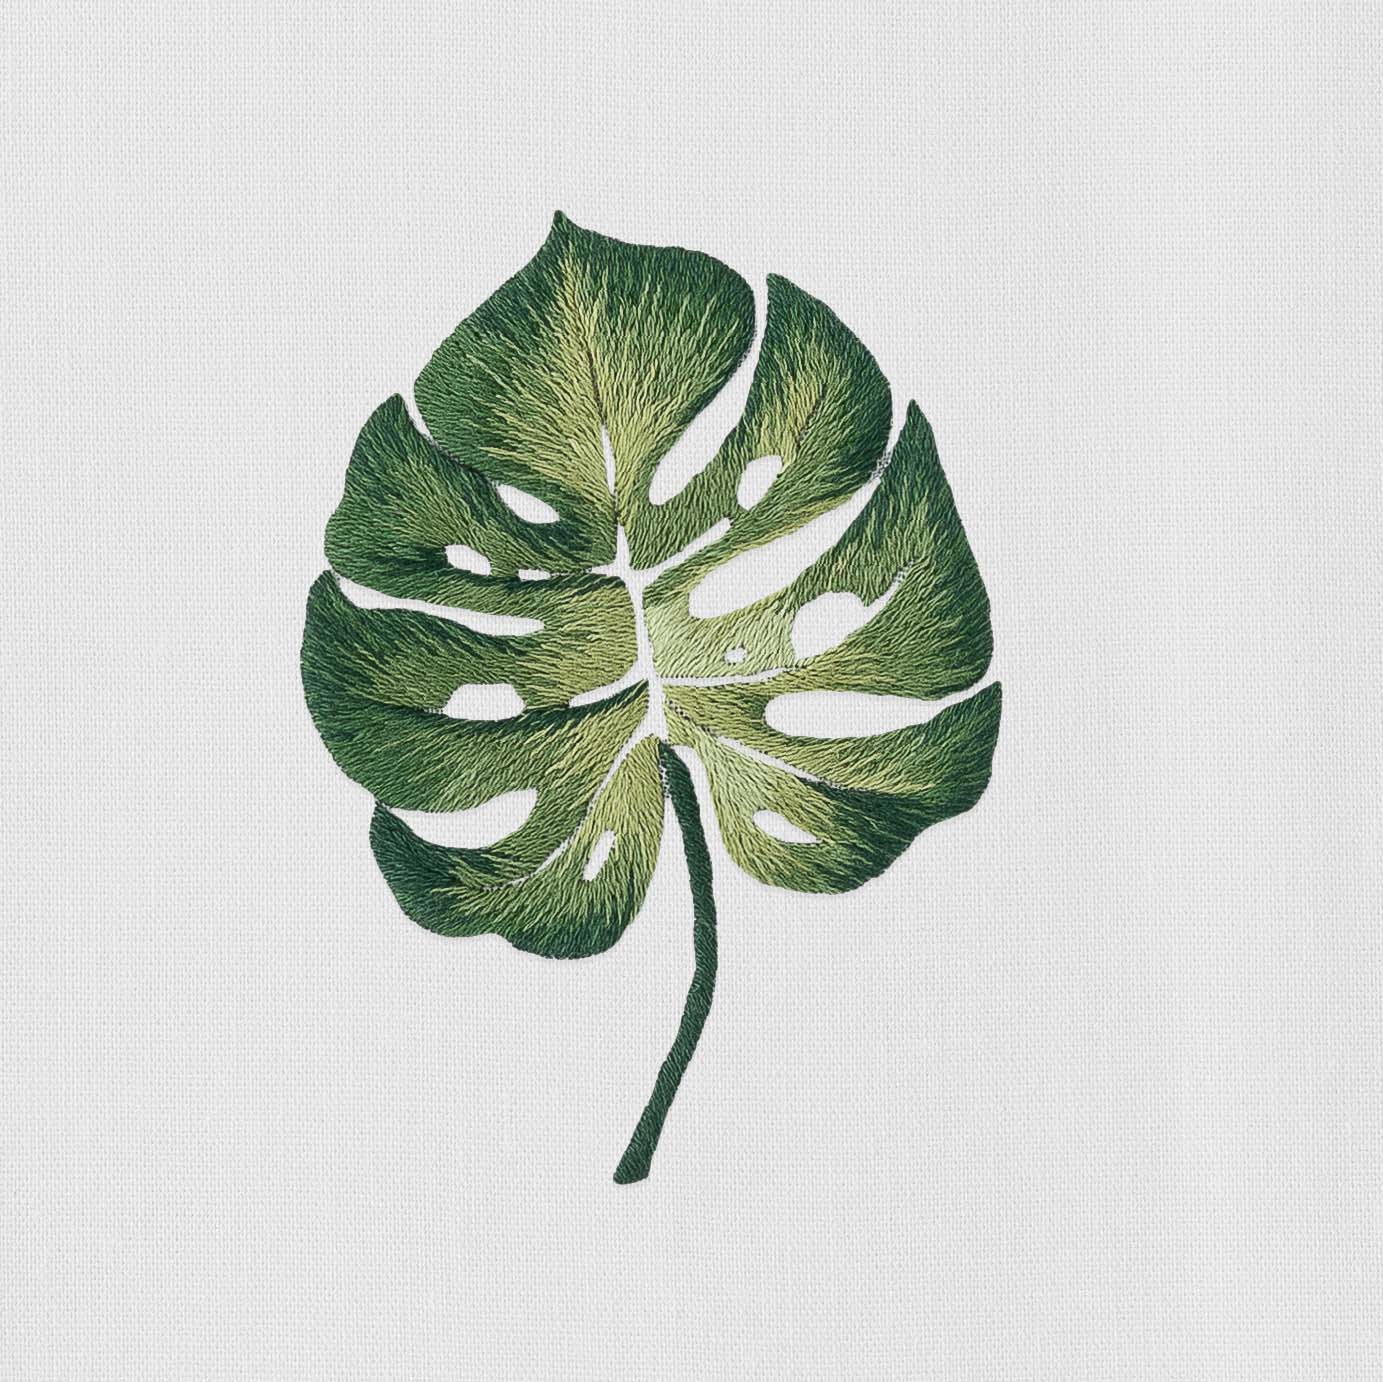 An illustration of a Tropical Leaf Napkin on a white background, made by Henry Handwork.